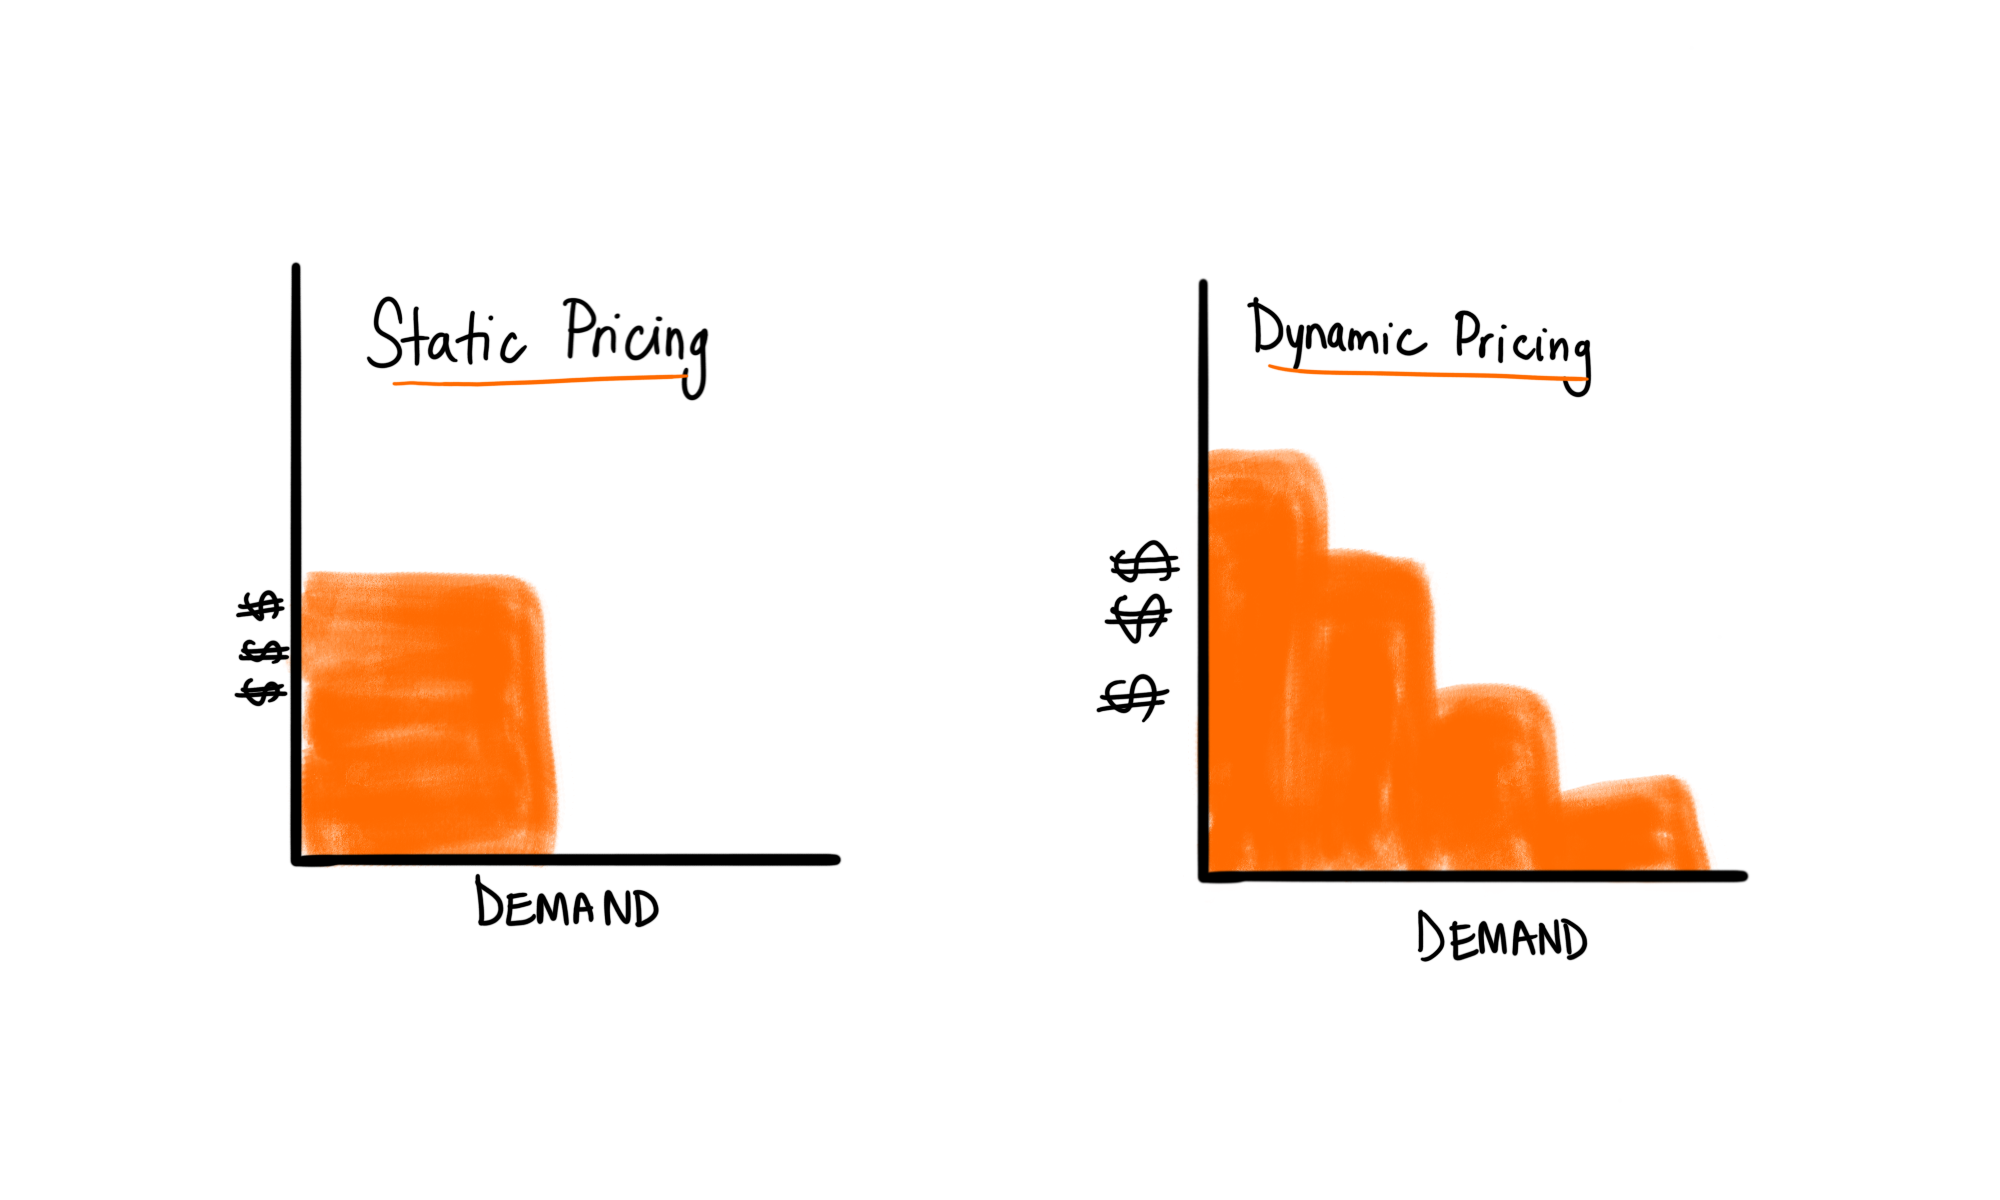 Static and Dynamic pricing